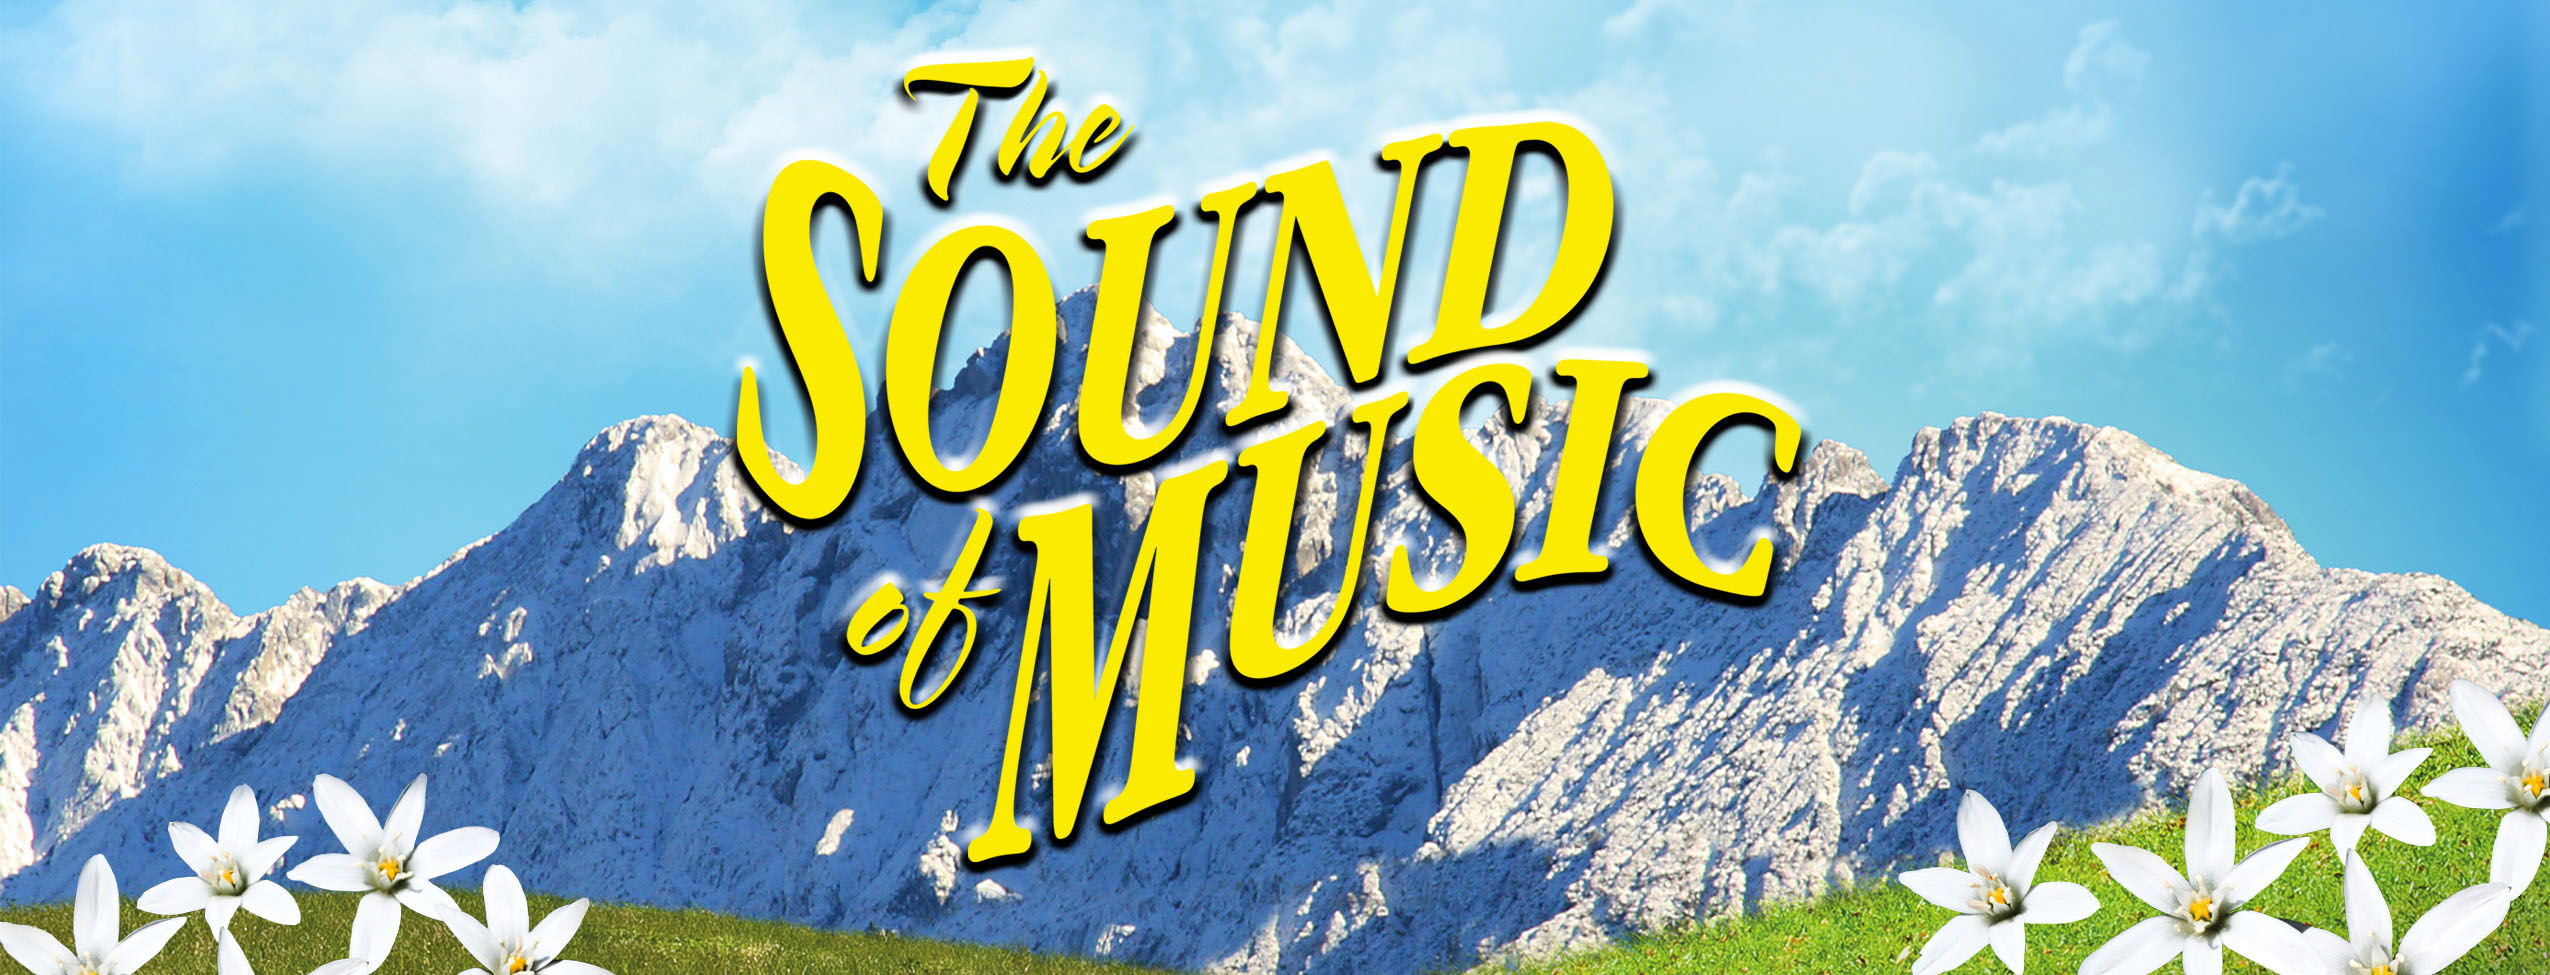 "The Sound of Music" Logo hangs in front of the Austrian mountains.